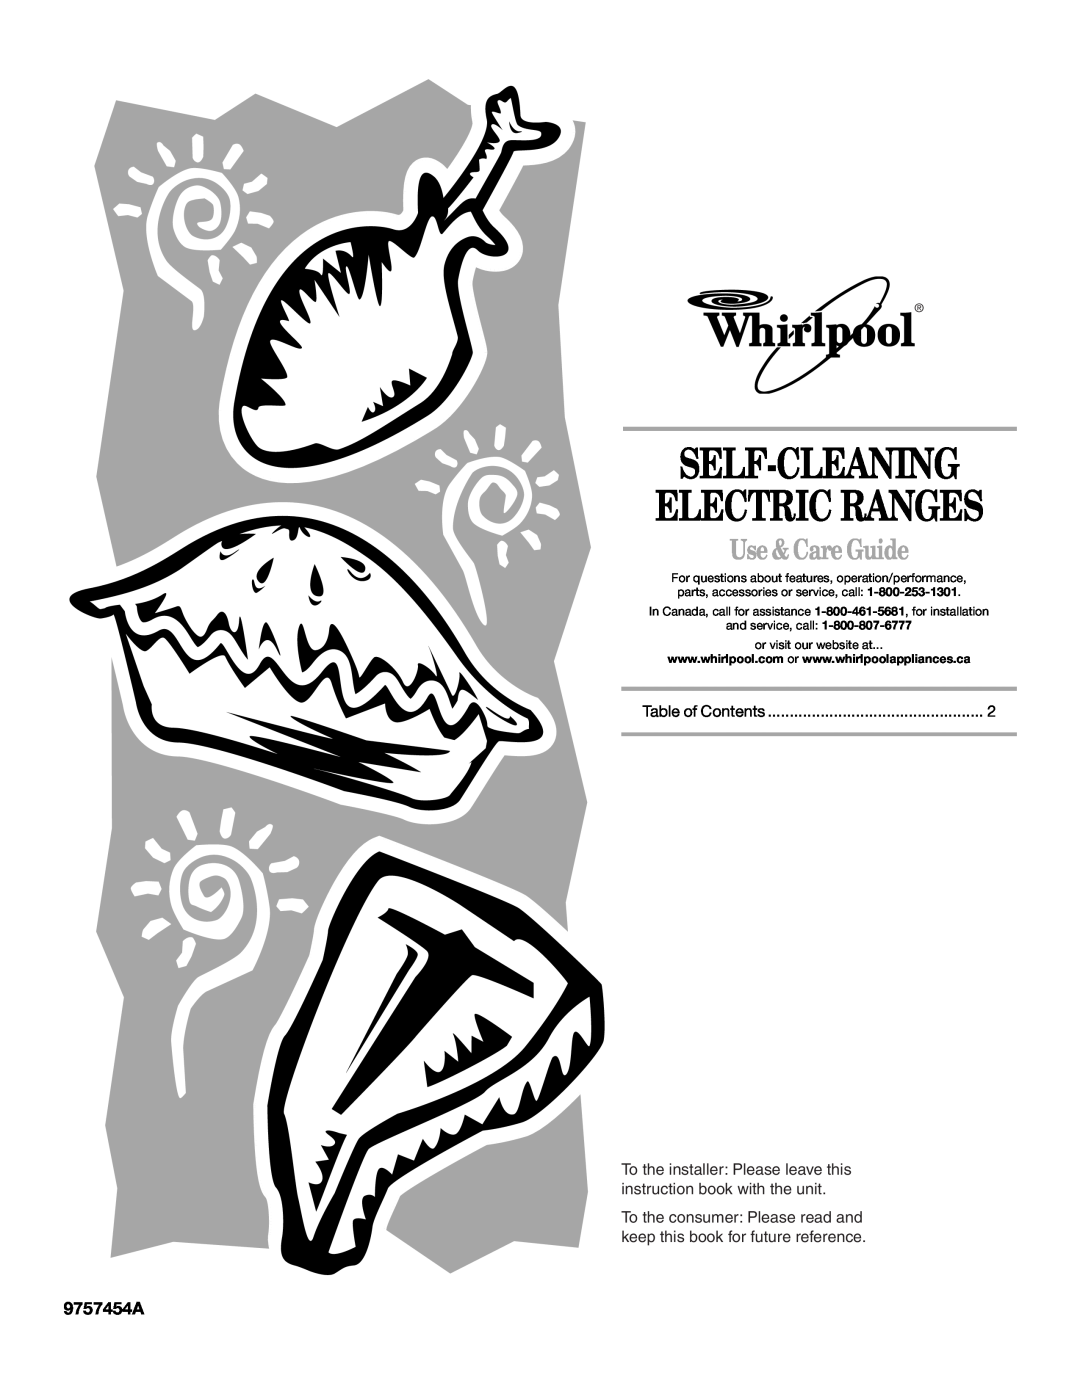 Whirlpool manual 9757454A, Self-Cleaning Electric Ranges, Use & Care Guide 